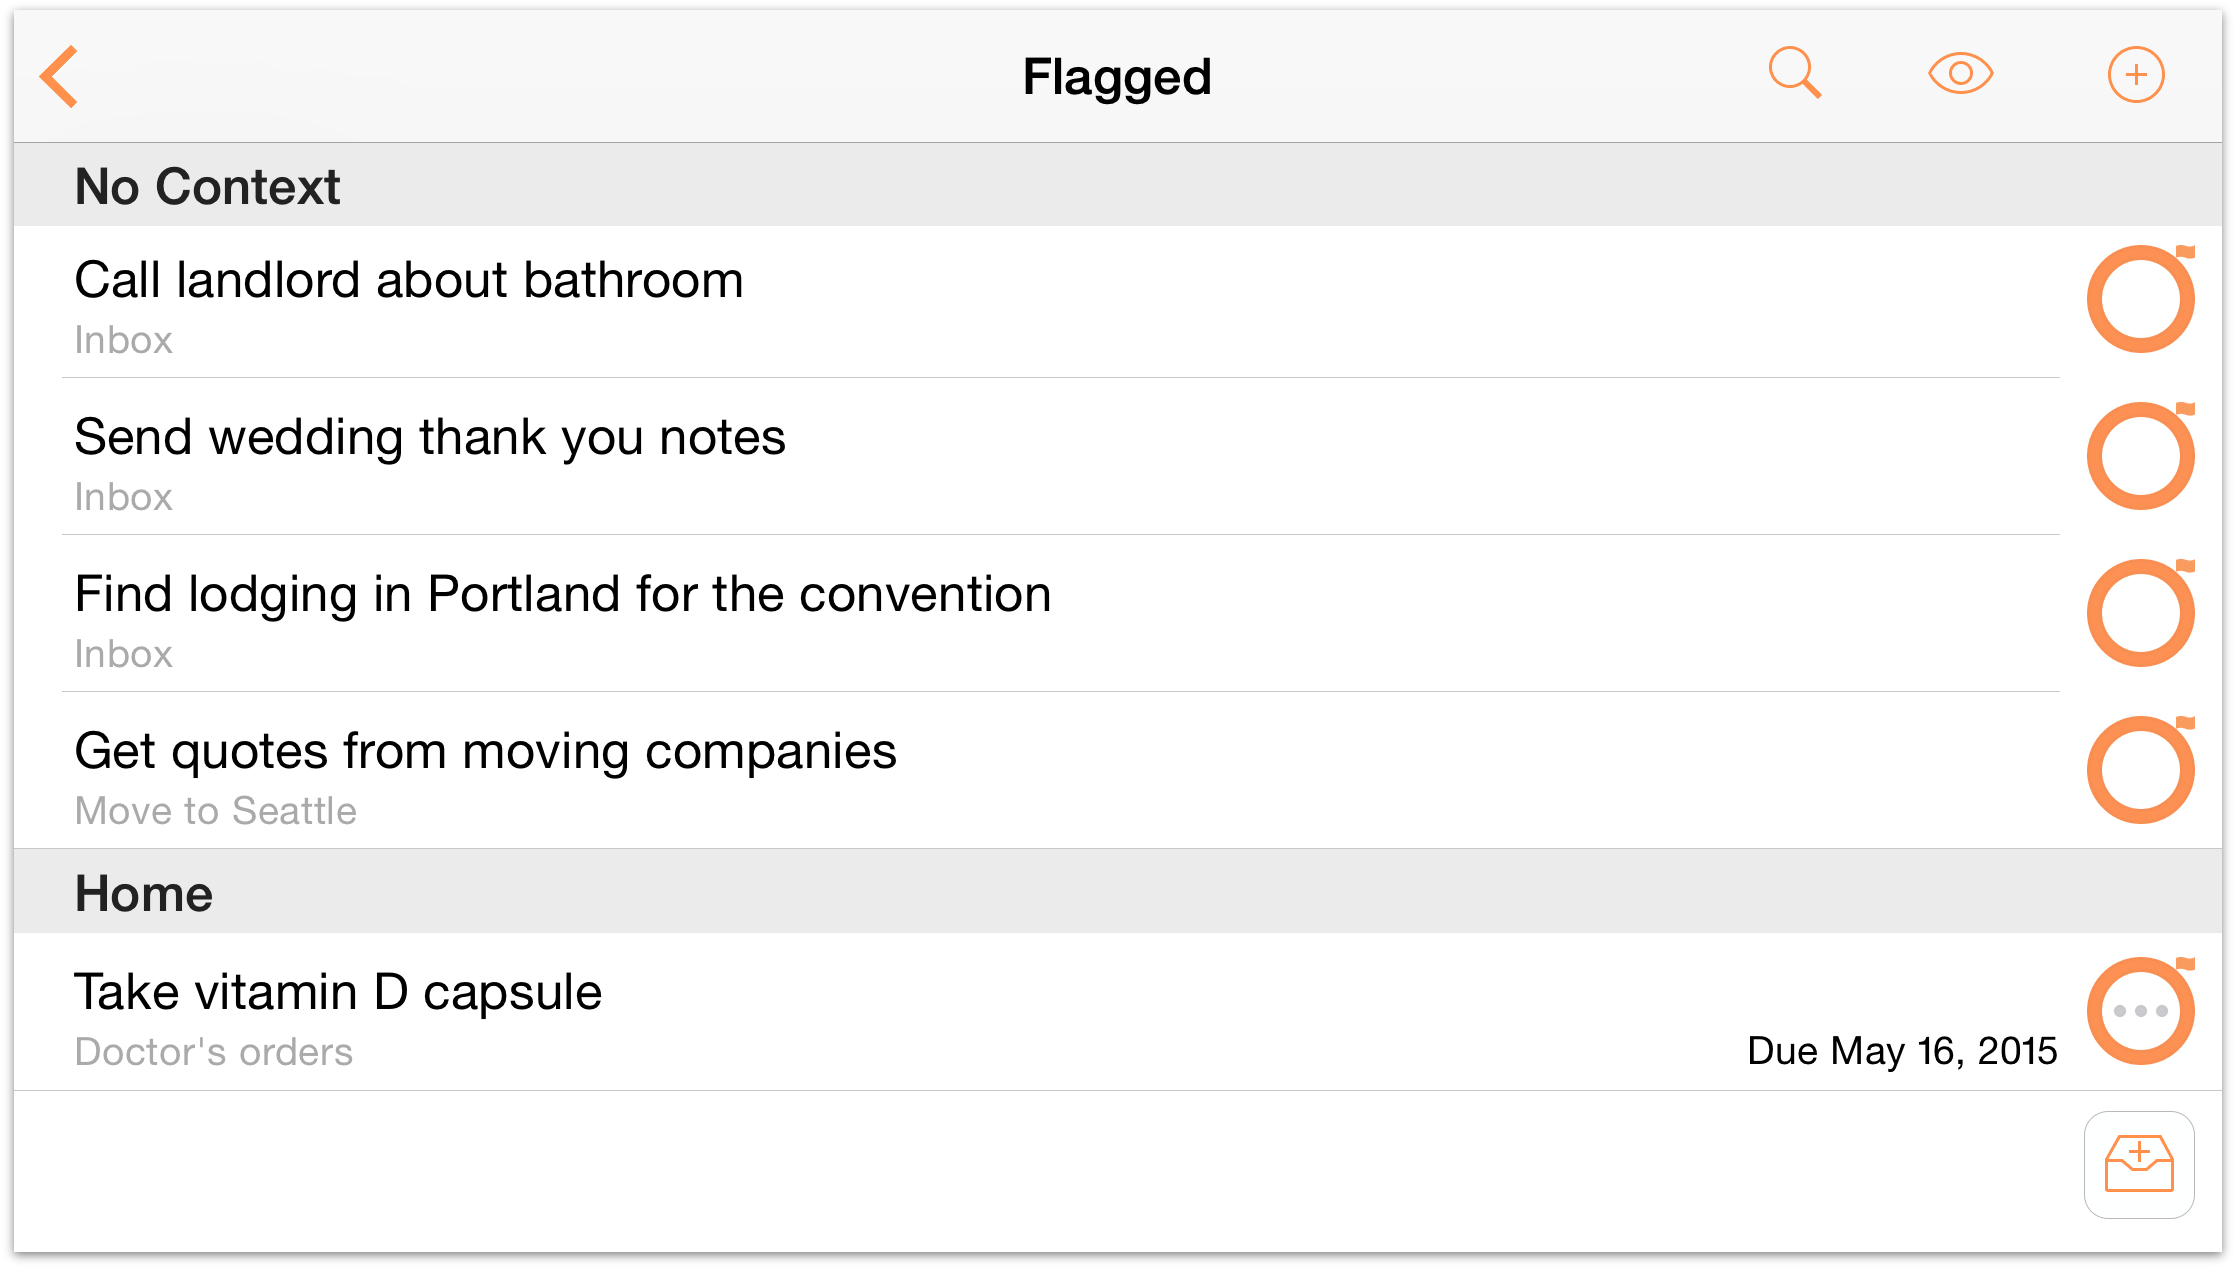 An example of the Flagged perspective in OmniFocus 2 for iOS on iPhone 6 Plus.